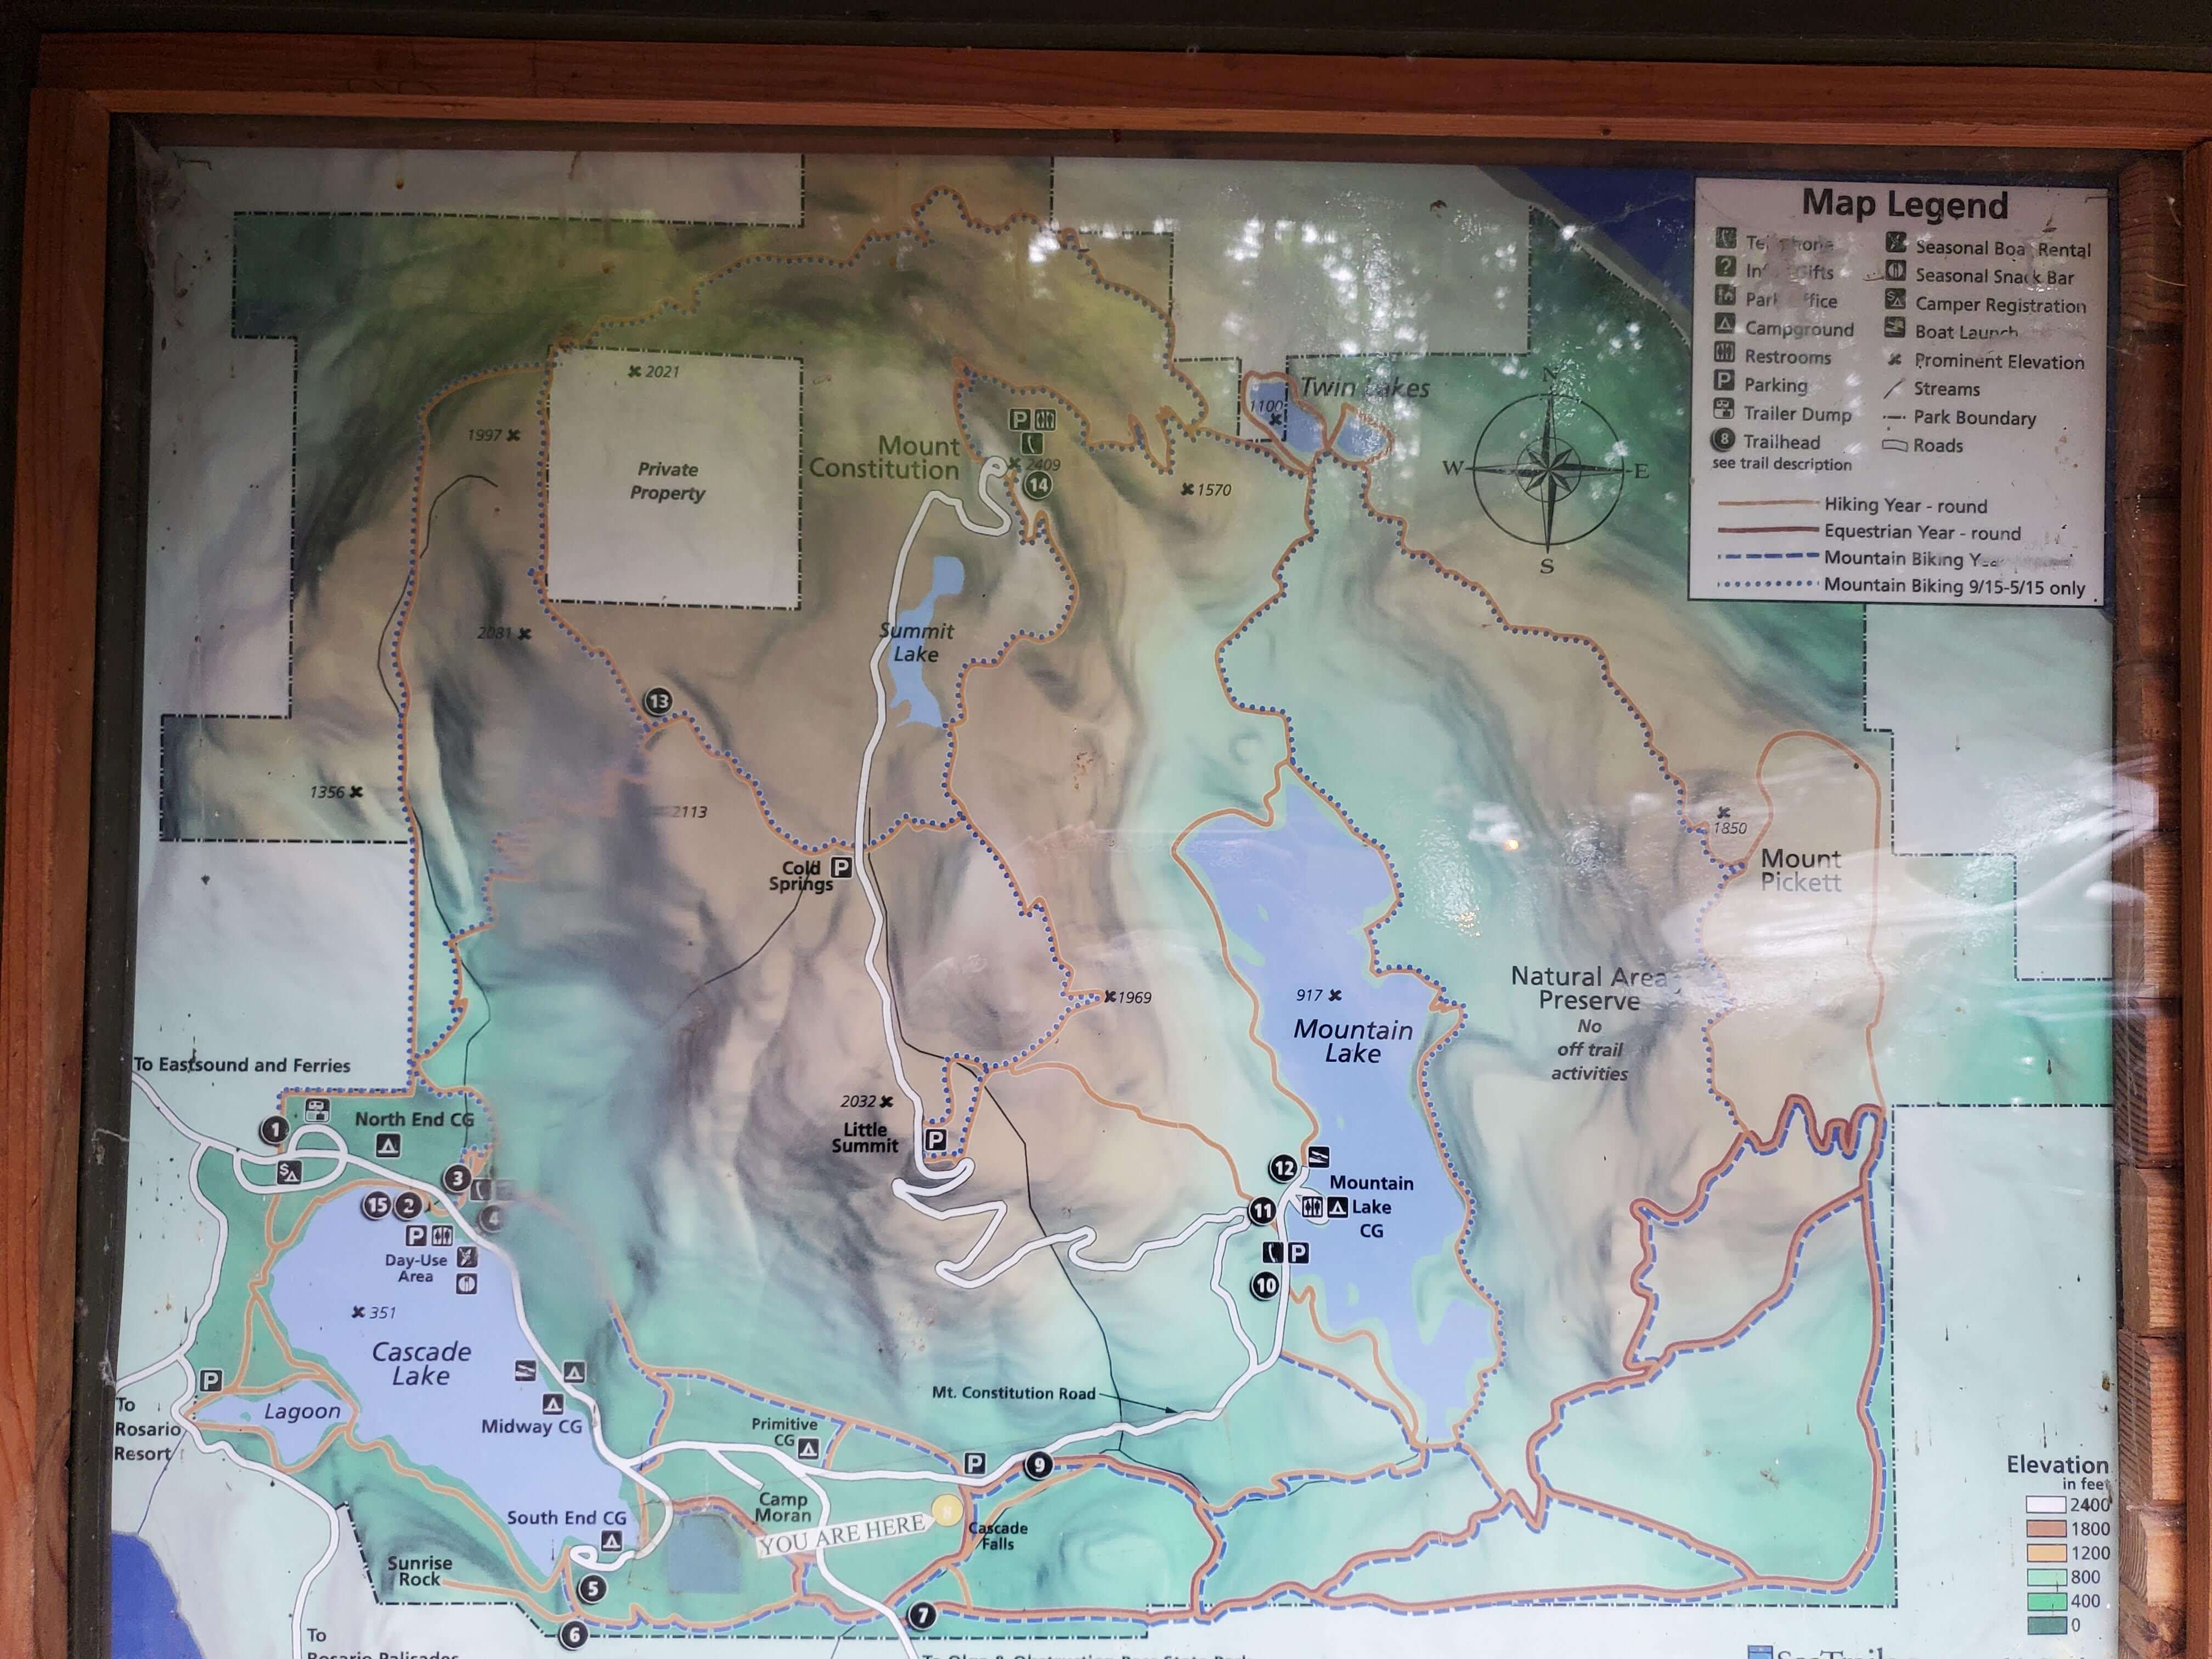 Map of the trails in Moran State Park on Orcas Island